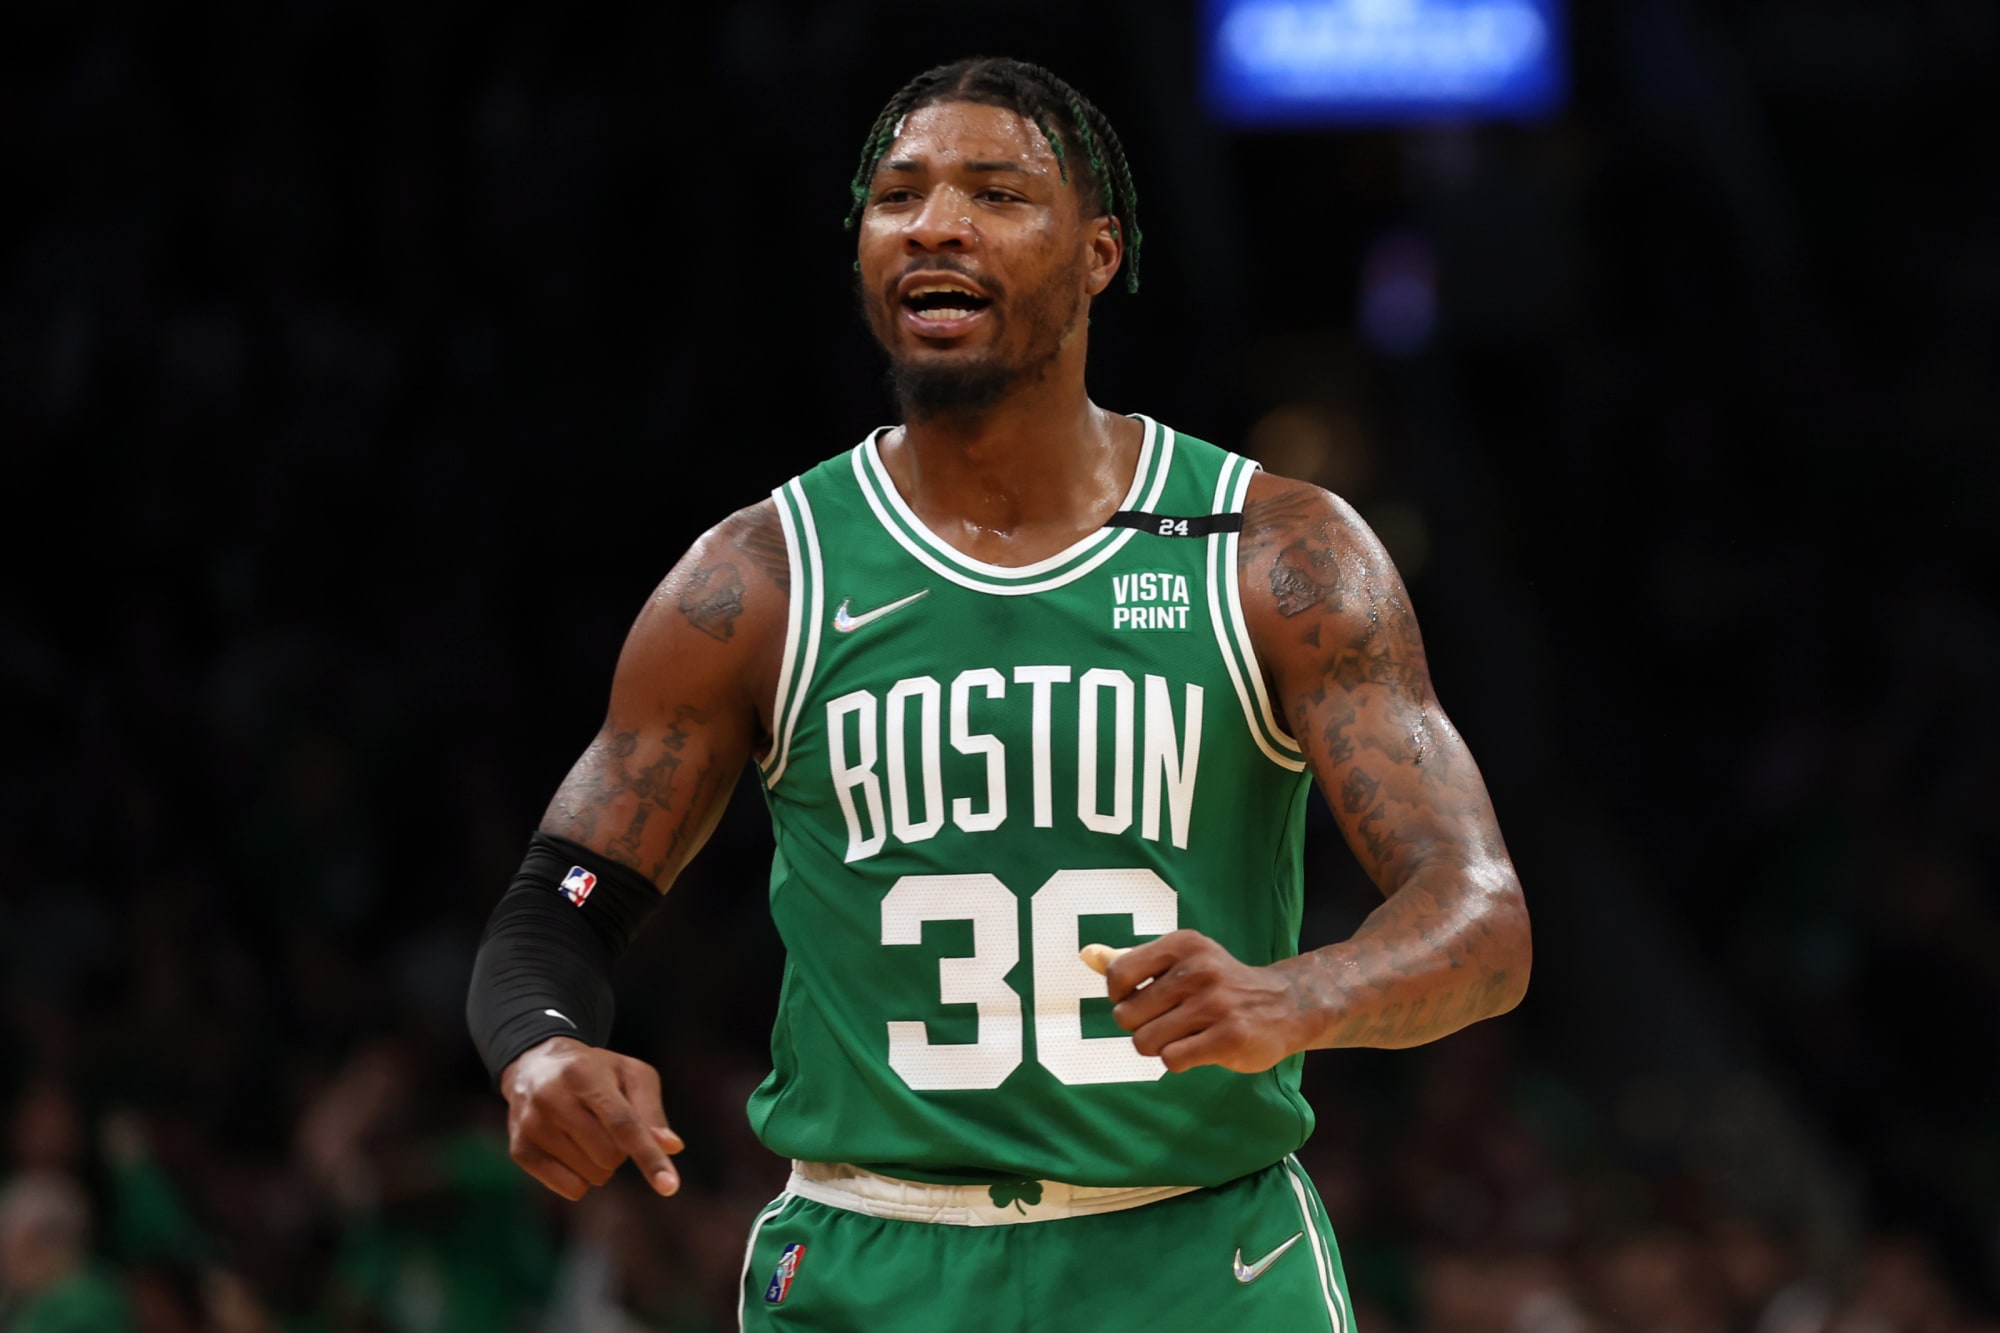 Marcus Smart Named NBA Defensive Player Of The Year - CBS Boston